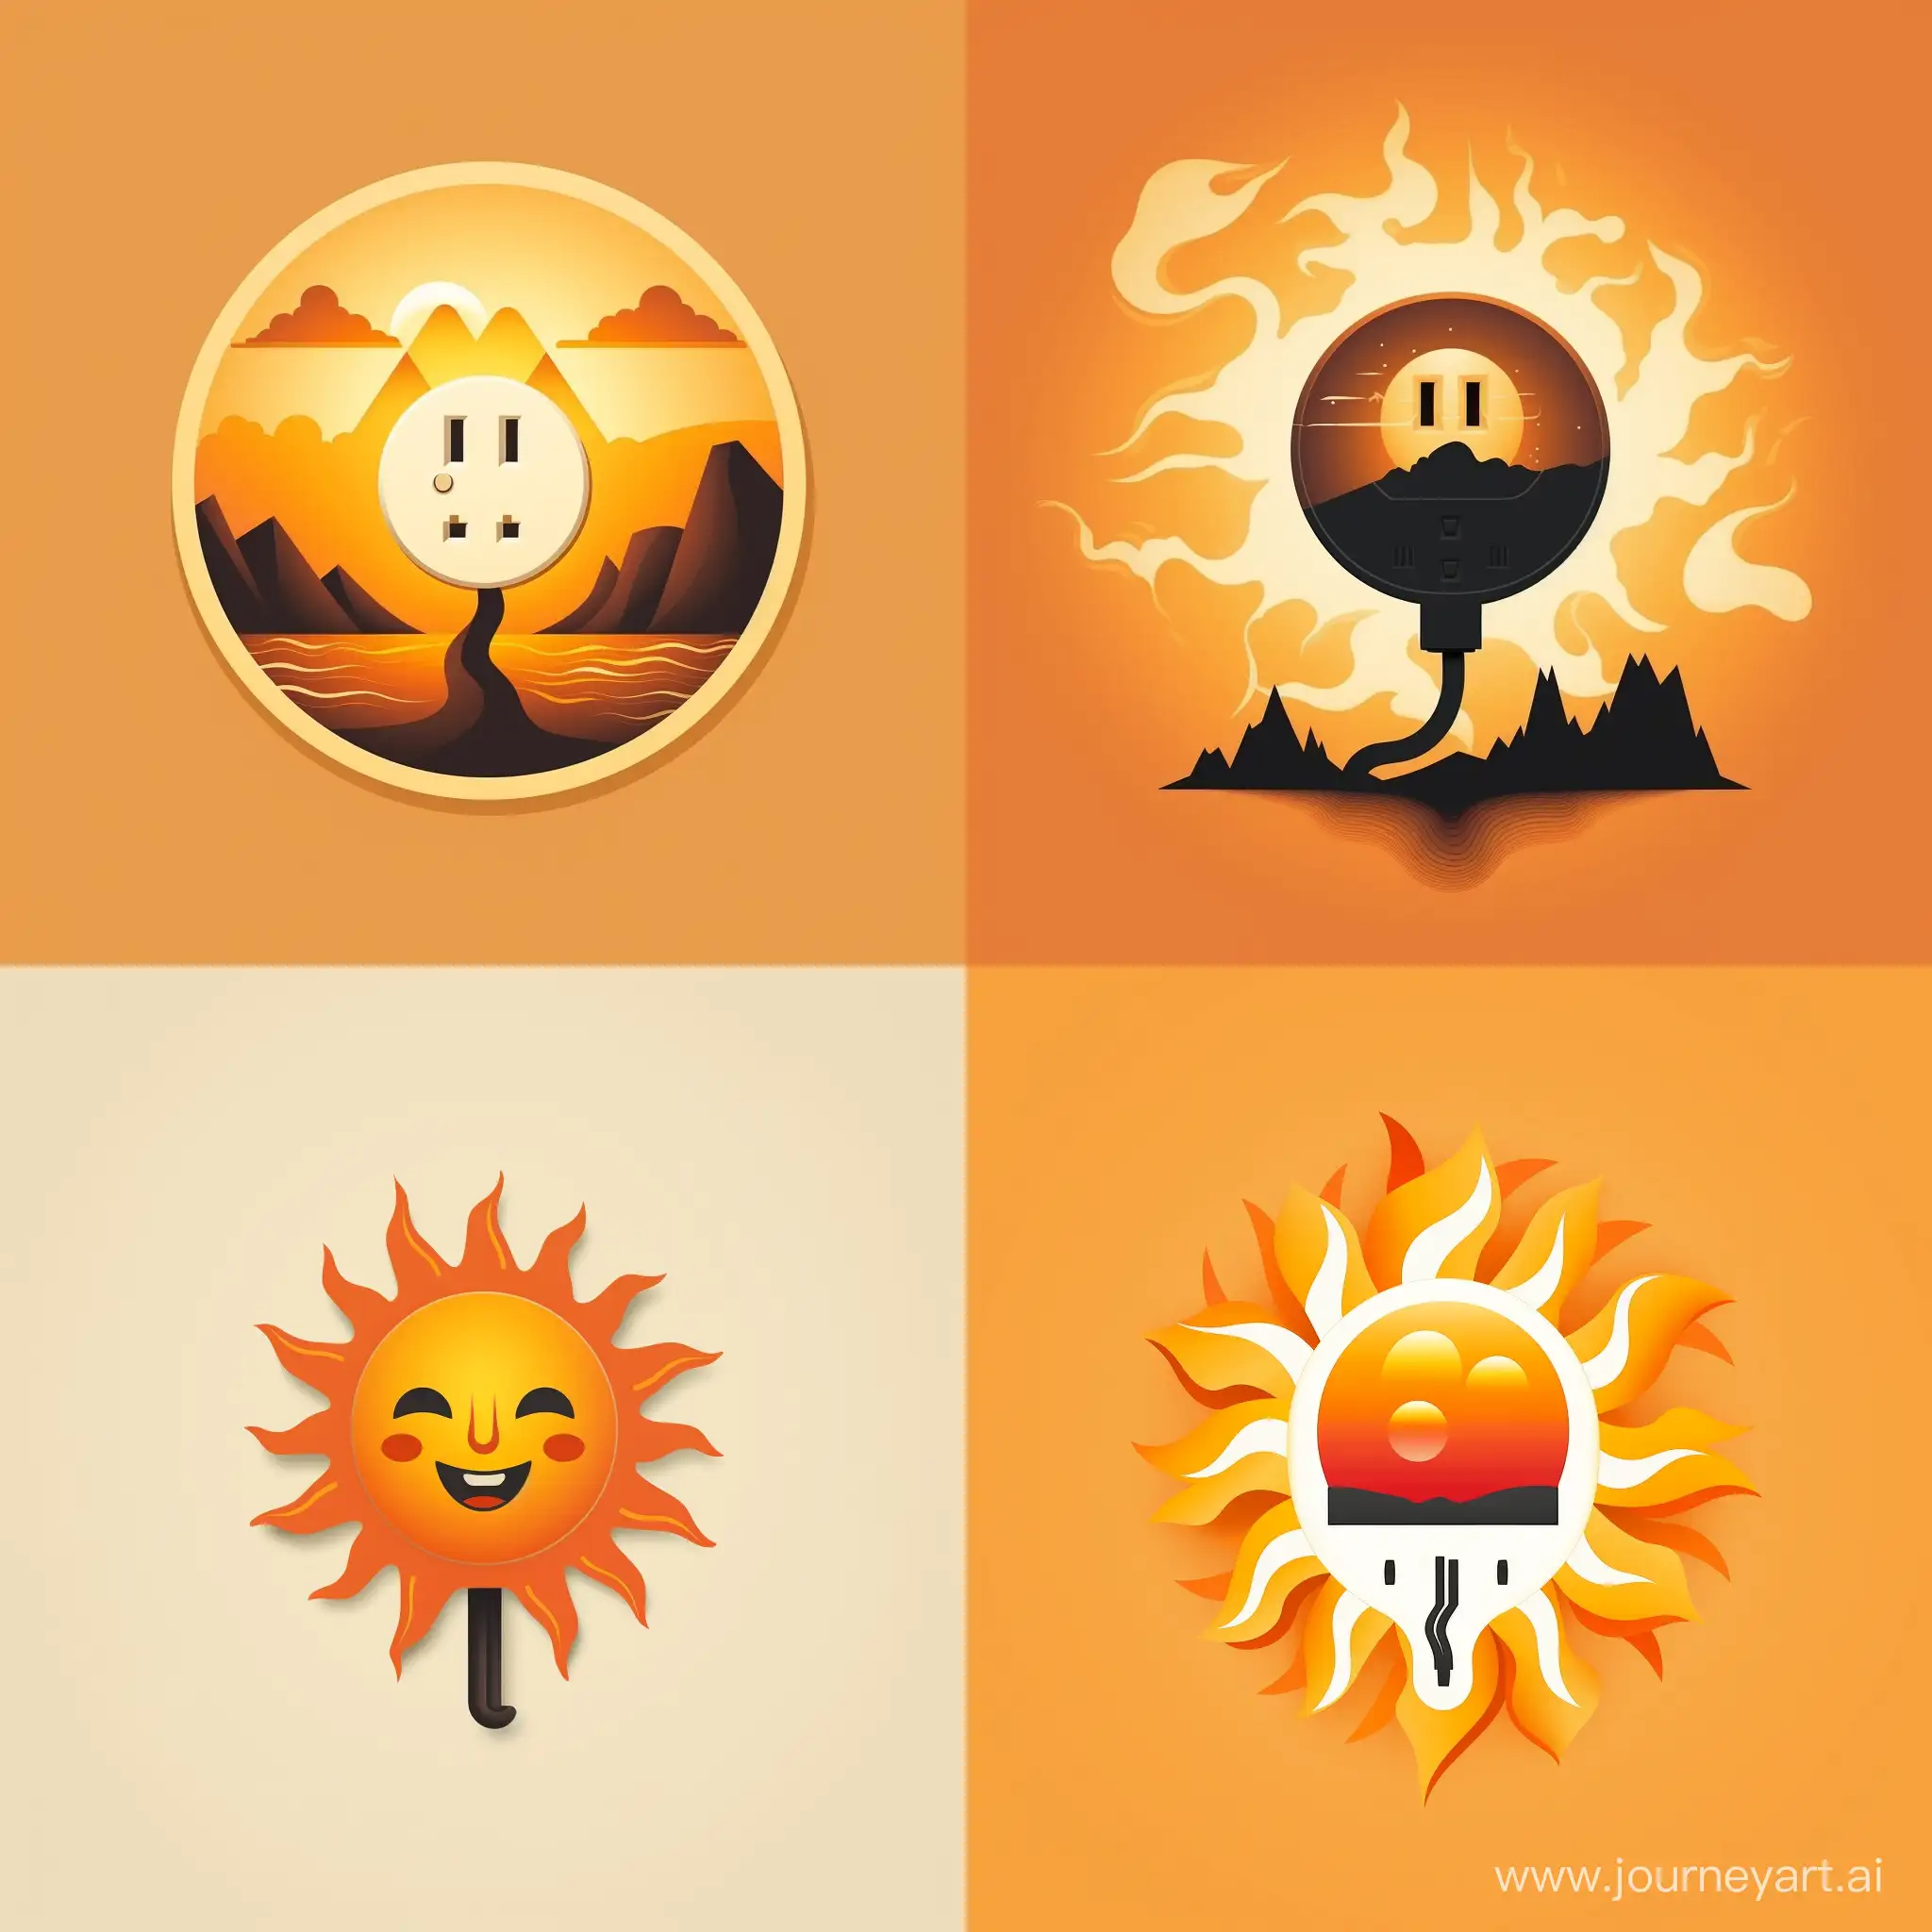 create the following sentence in a plain and modern logo: plug the SUN in the socket. Use subtractive design - showing the sun, the plug and the socket. The colors should be less as possible.